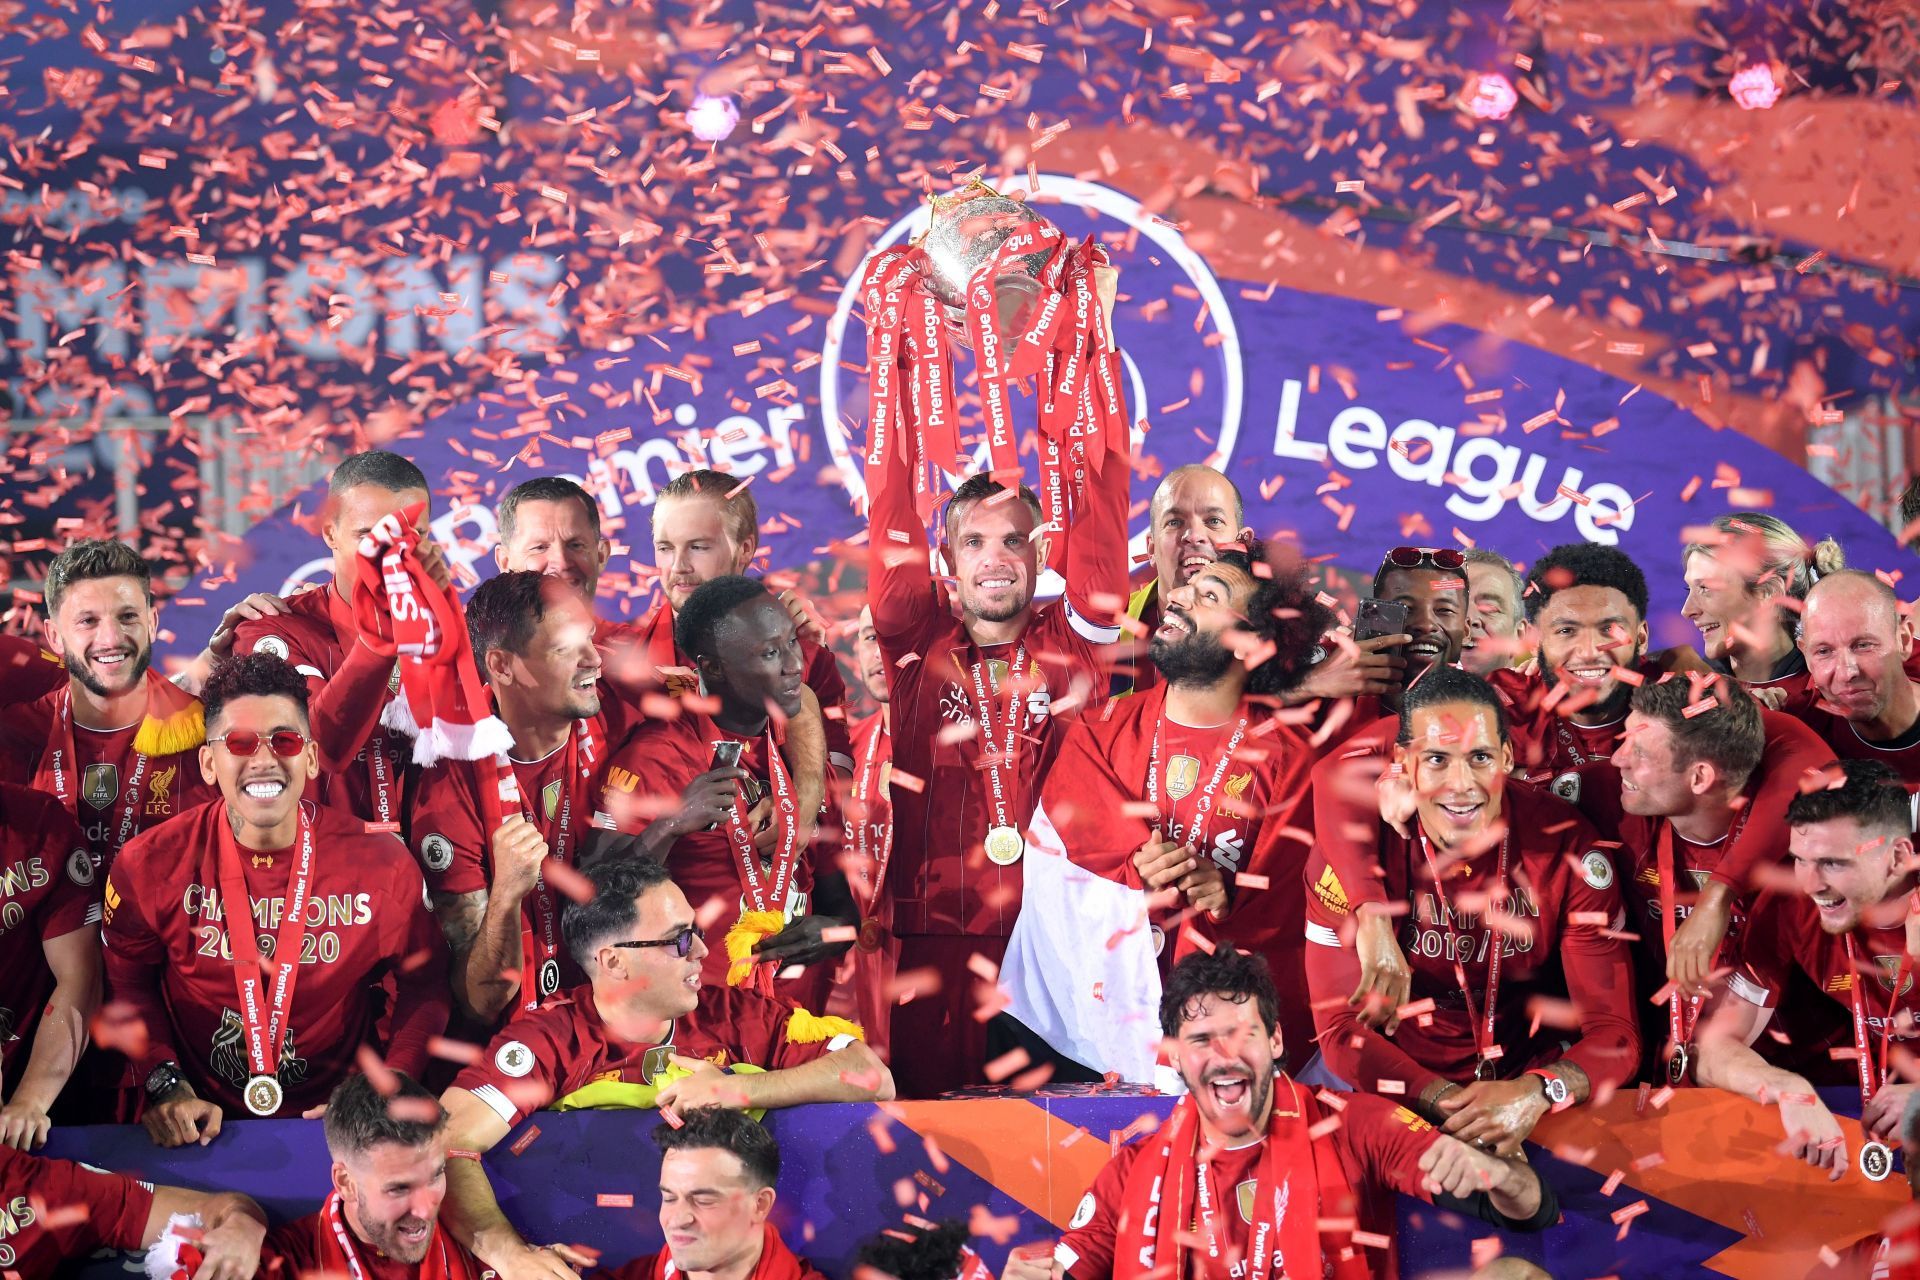 Liverpool won the Premier League in 2020 with a points tally of 99